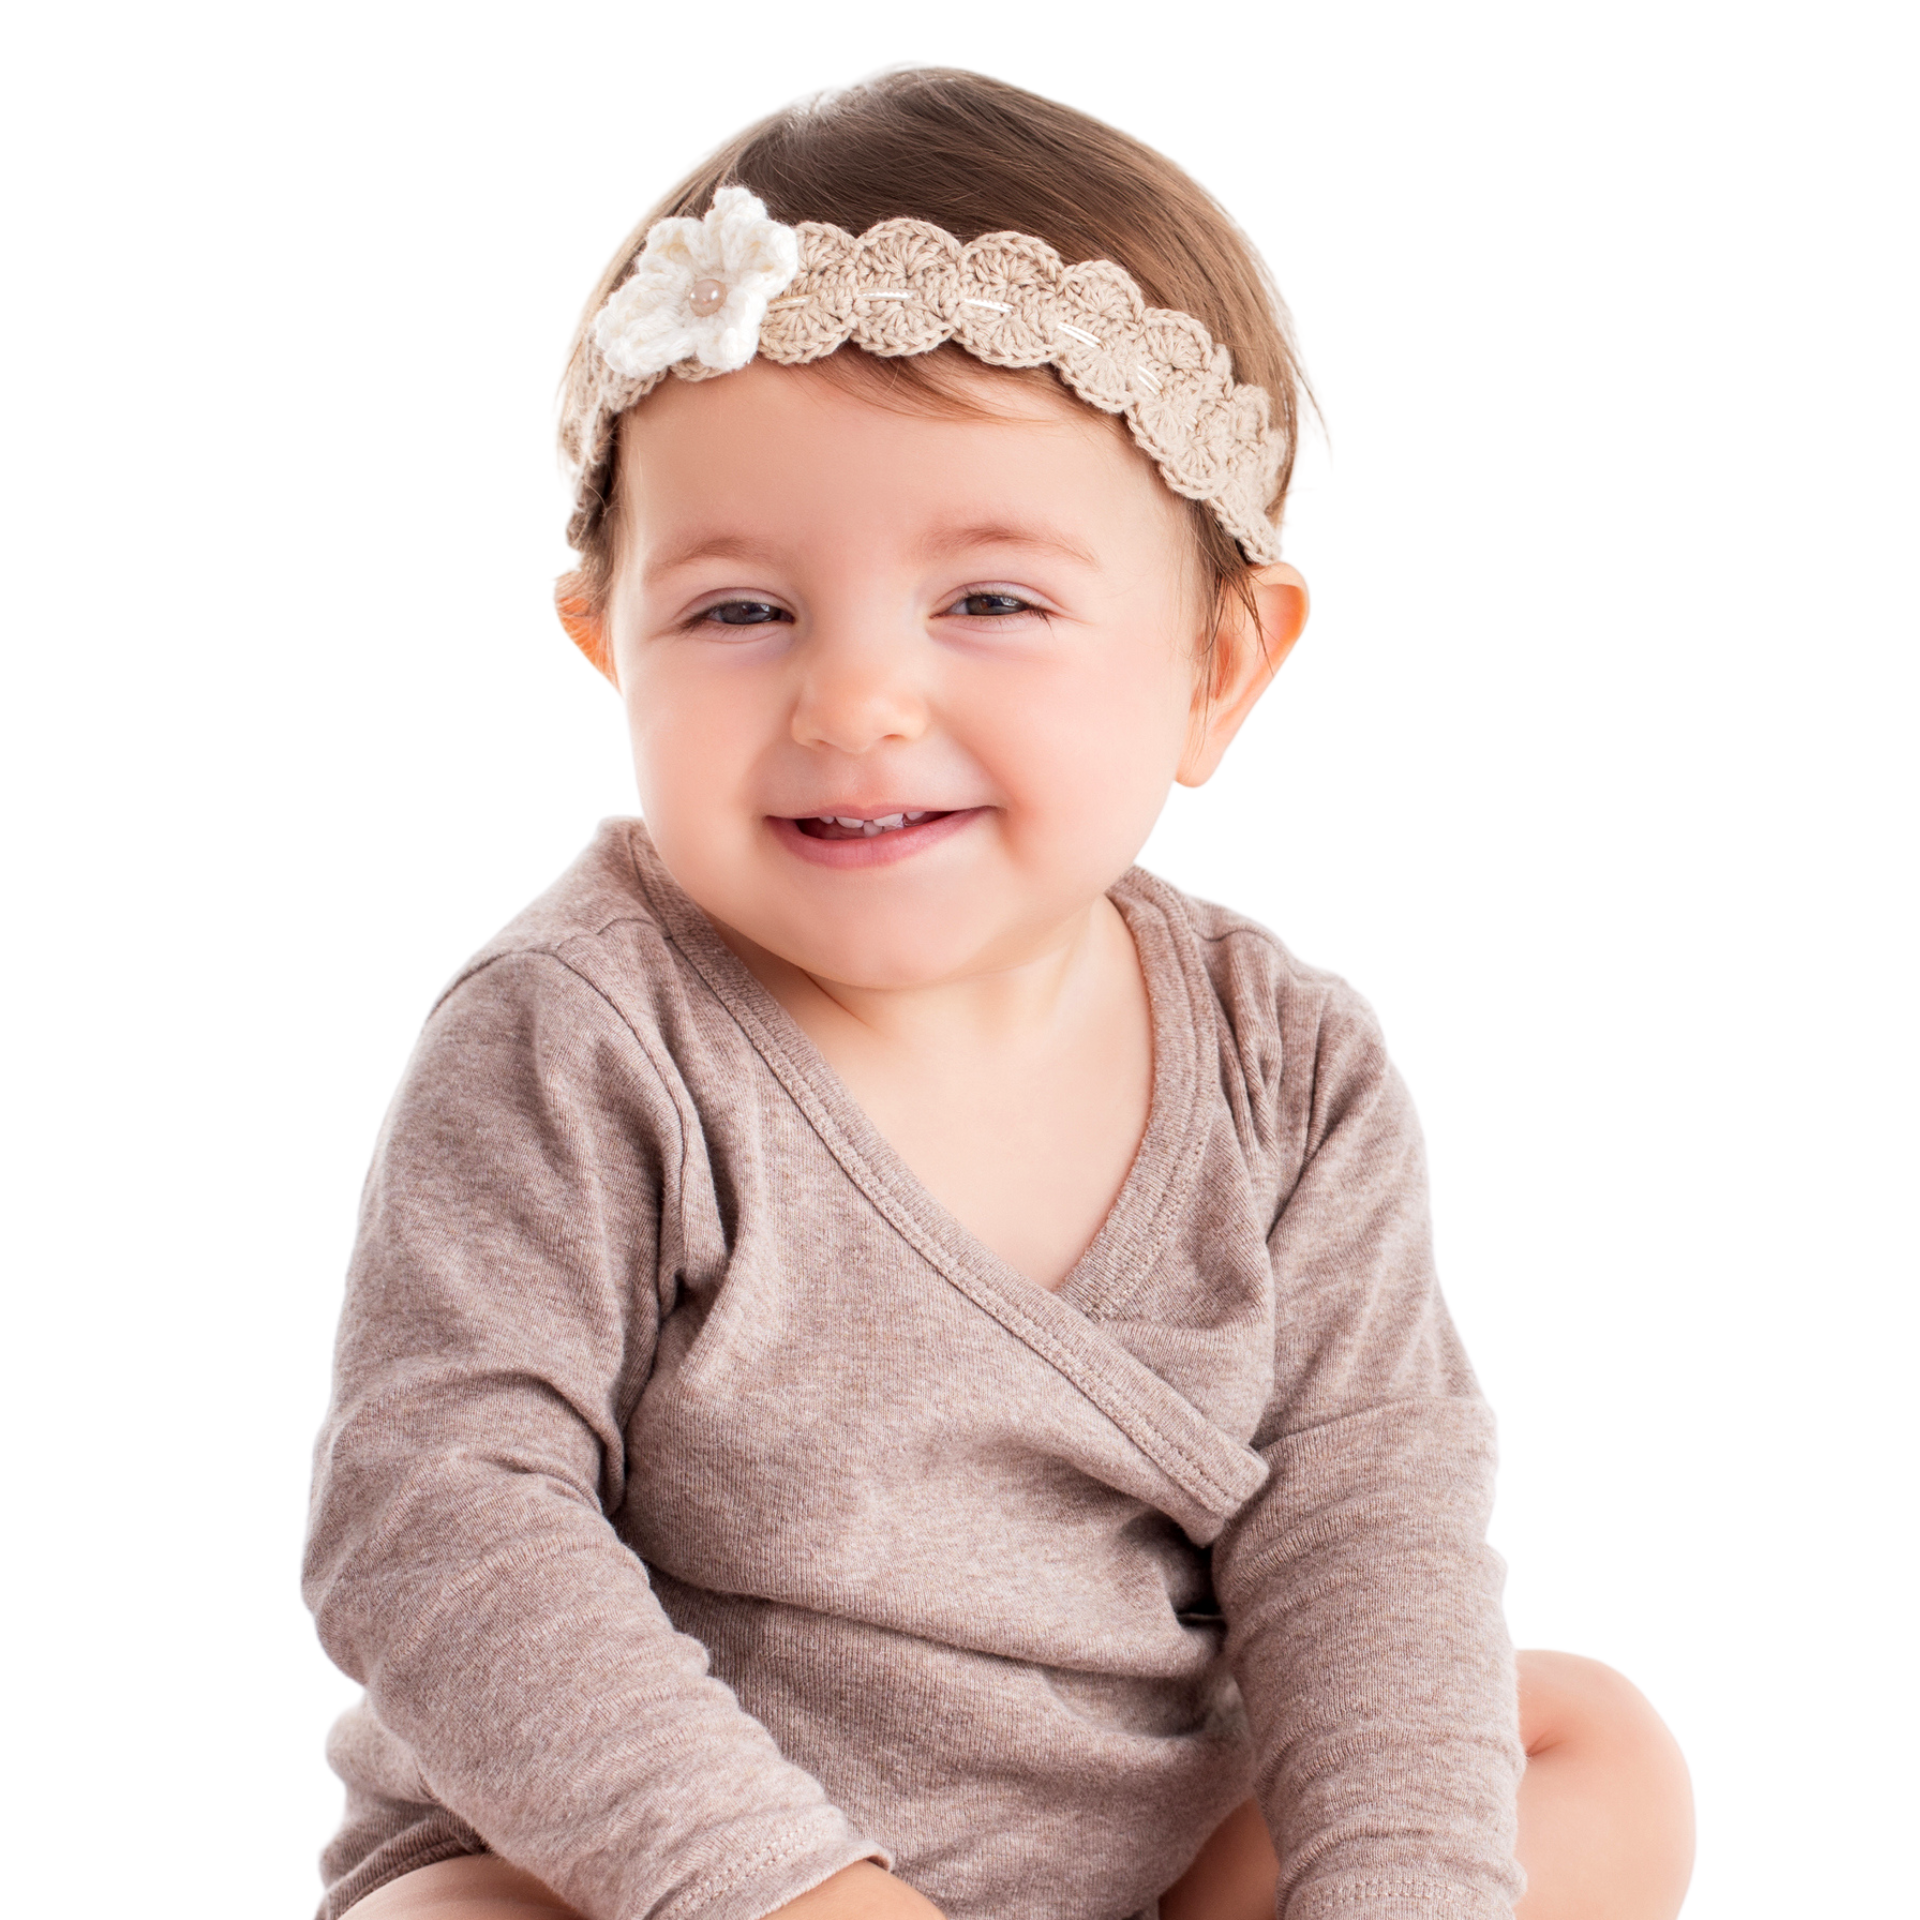 Smiling toddler girl with a knitted headband with a flower